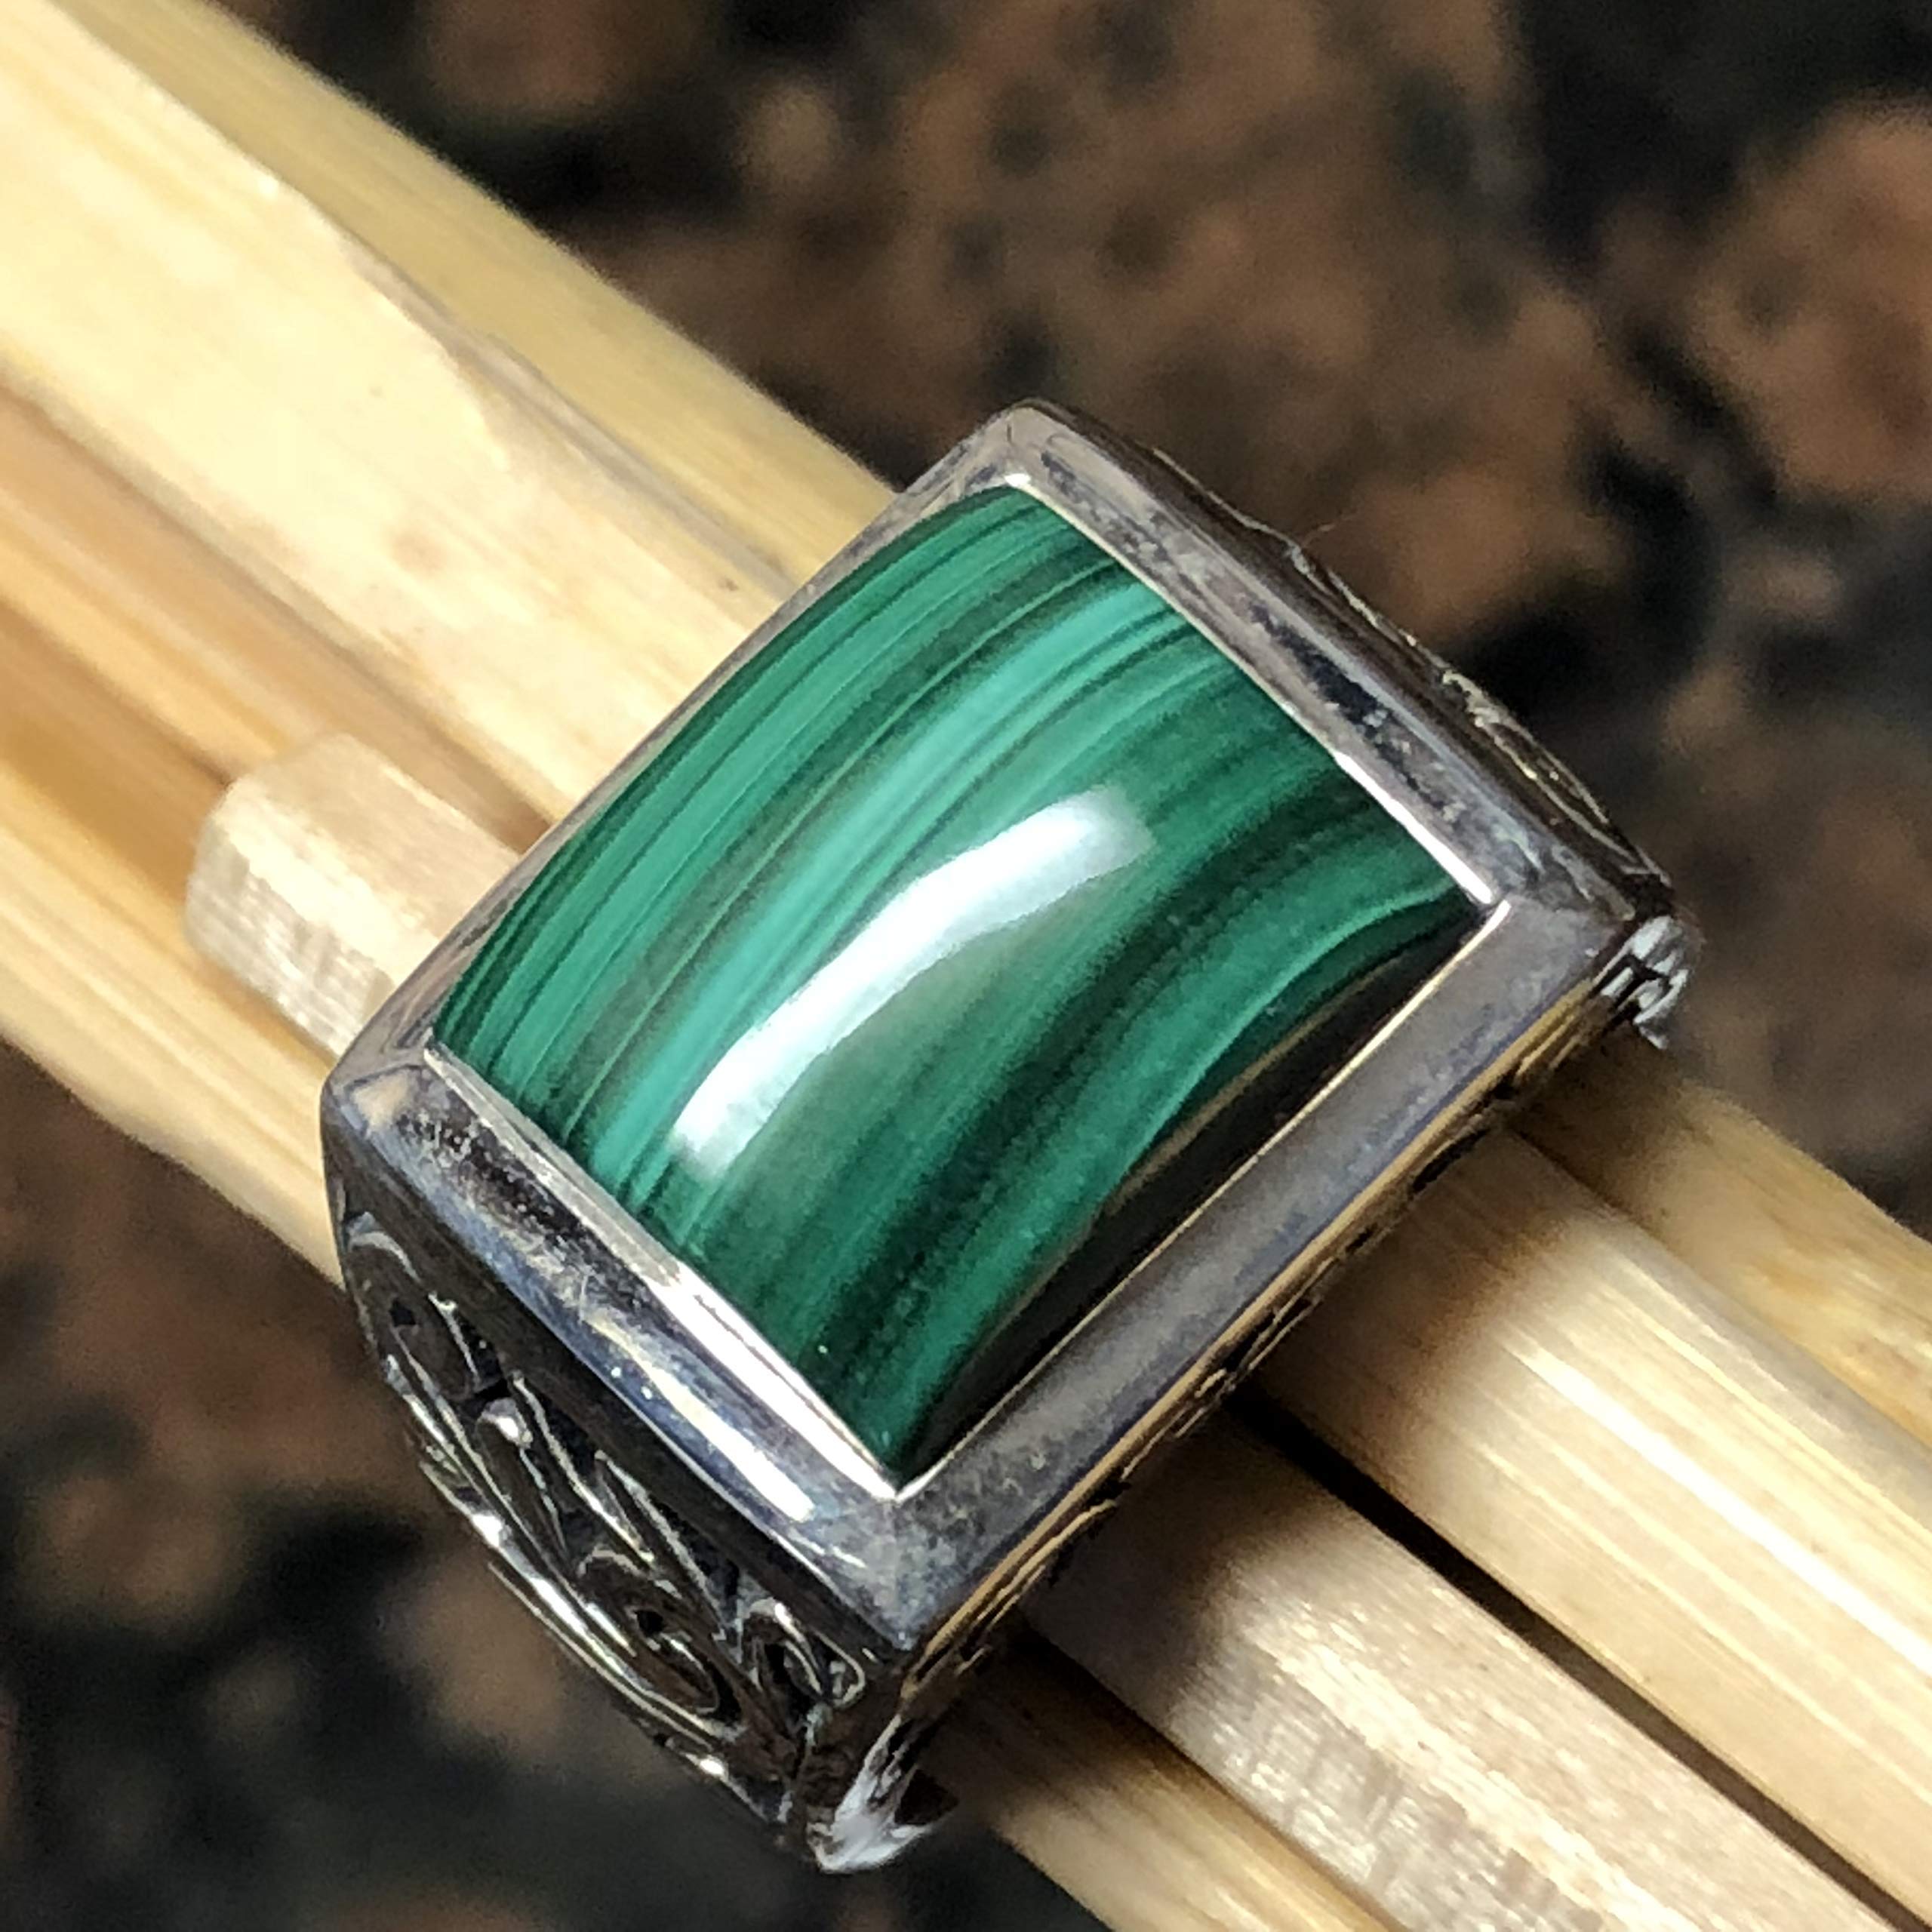 Natural Green Malachite 925 Solid Sterling Silver Men's Ring Size 10, 11 - Natural Rocks by Kala